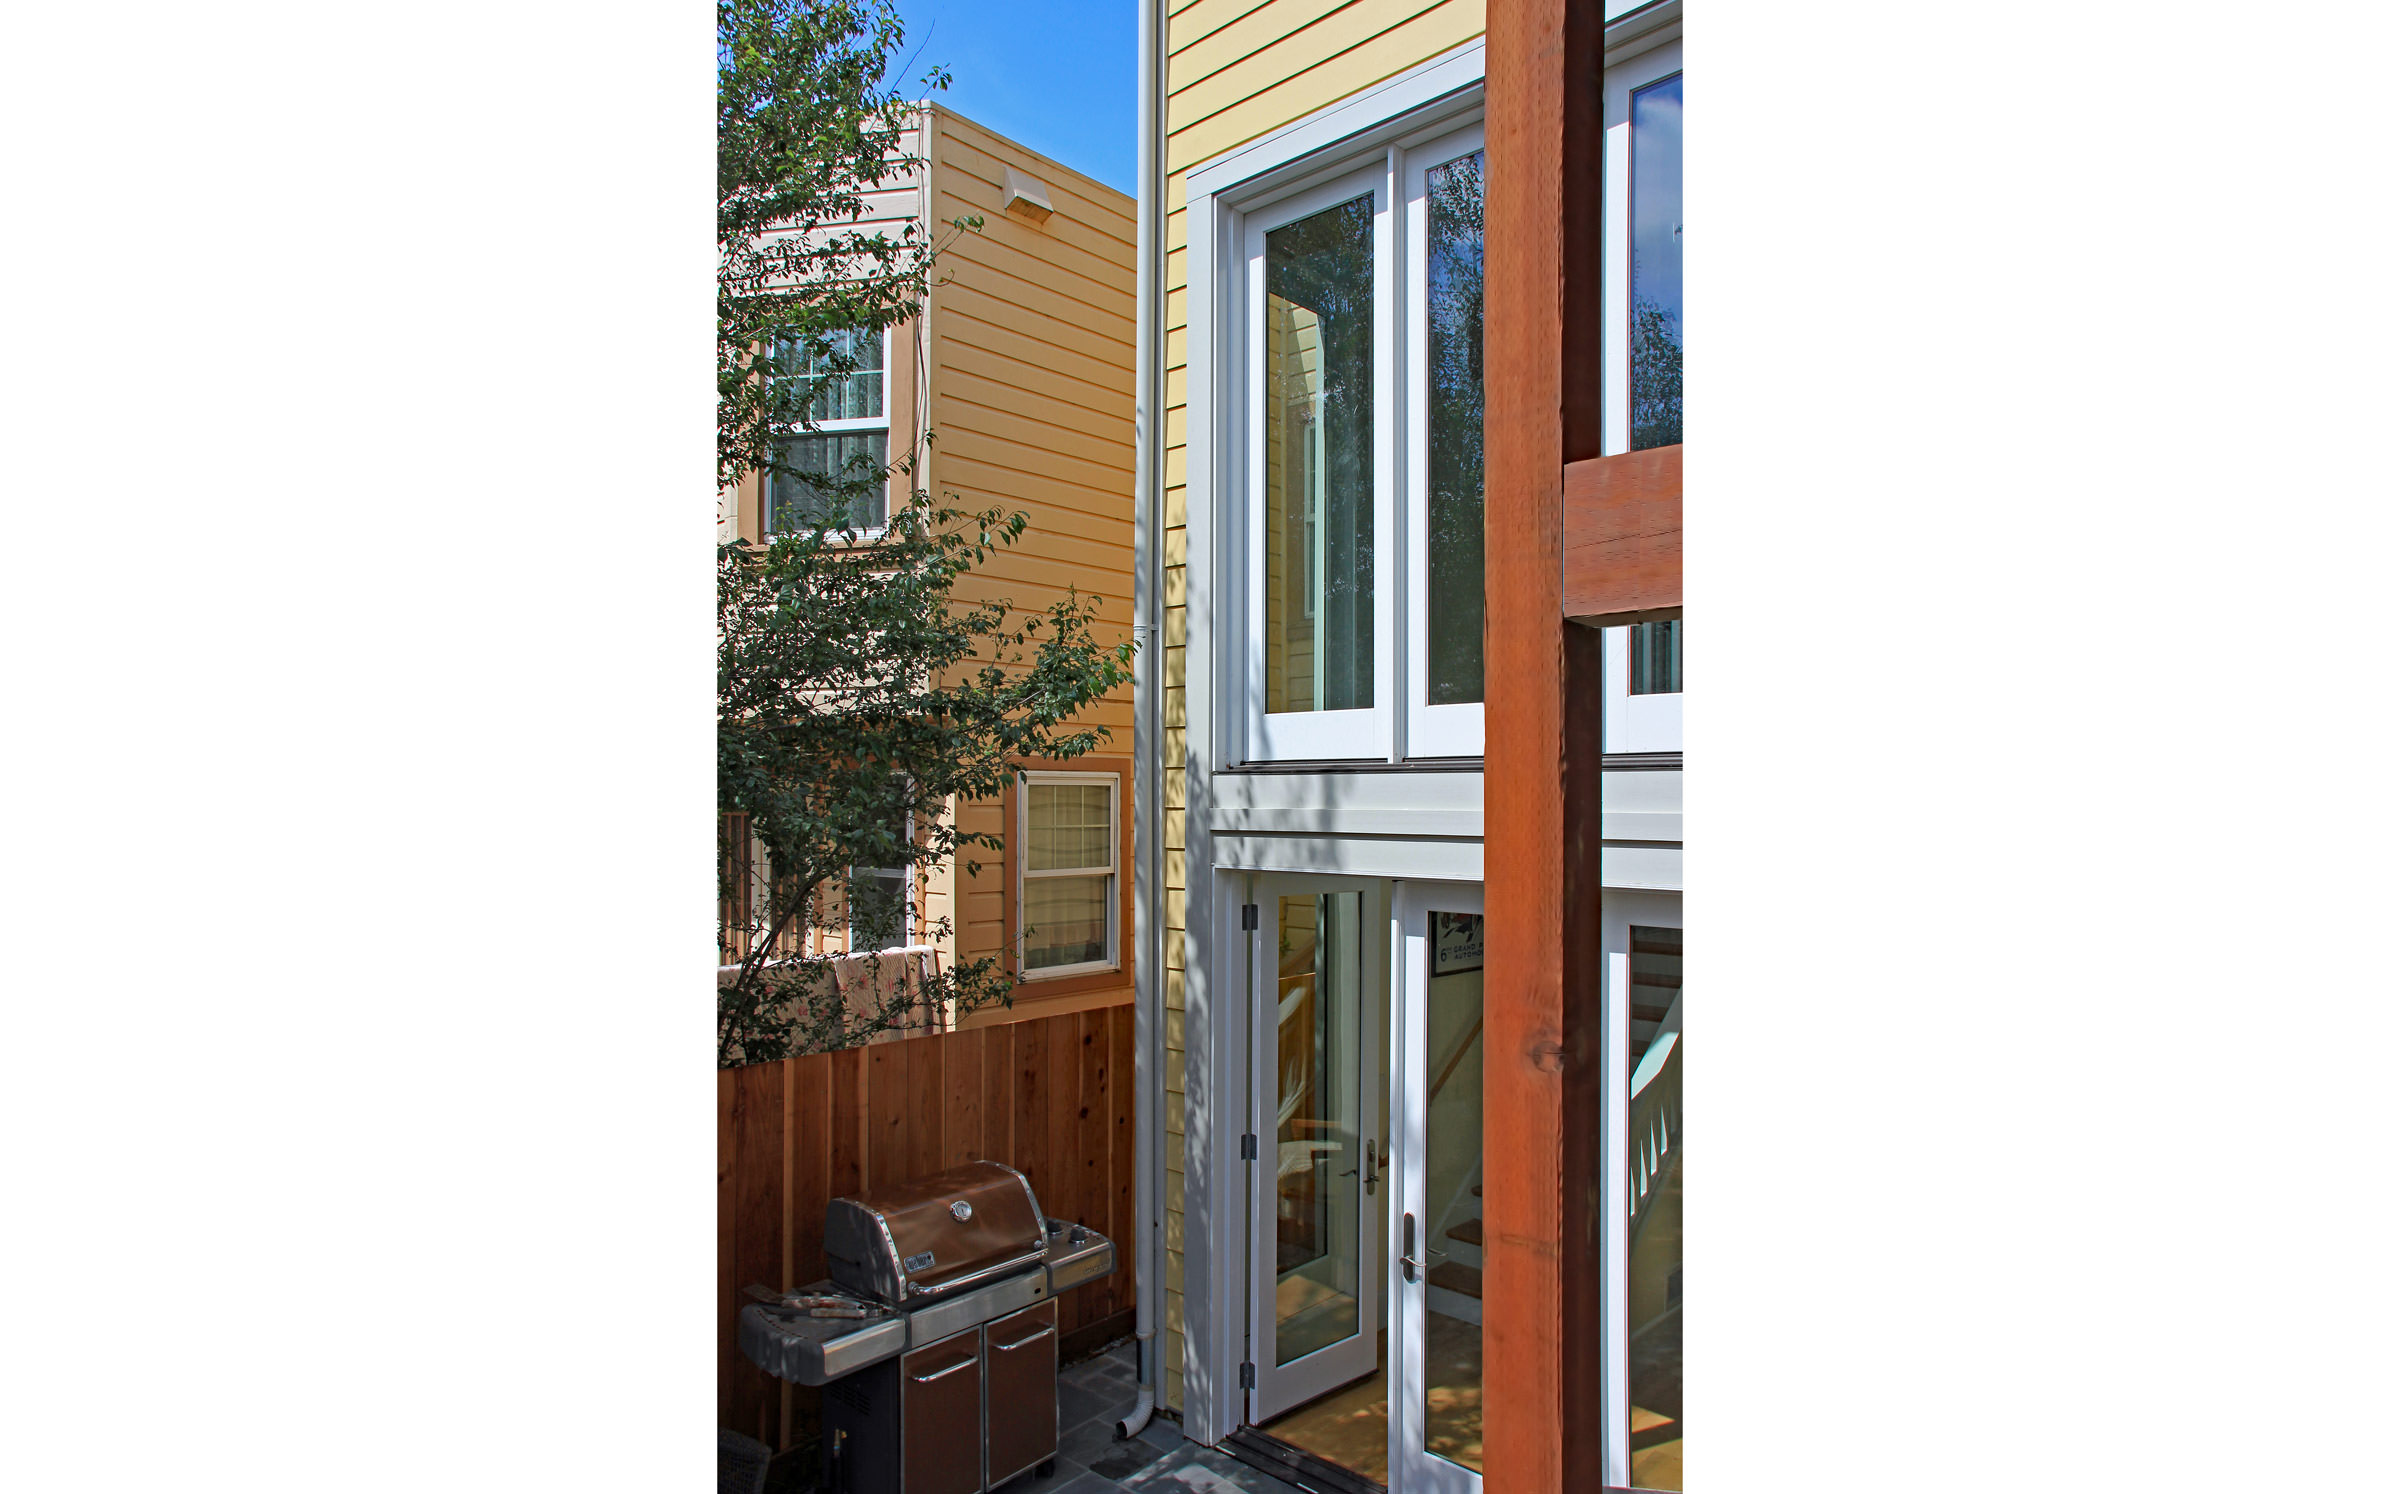 San Francisco Noe Valley 2 Unit Entire House Remodel and Addition Rear Yard View